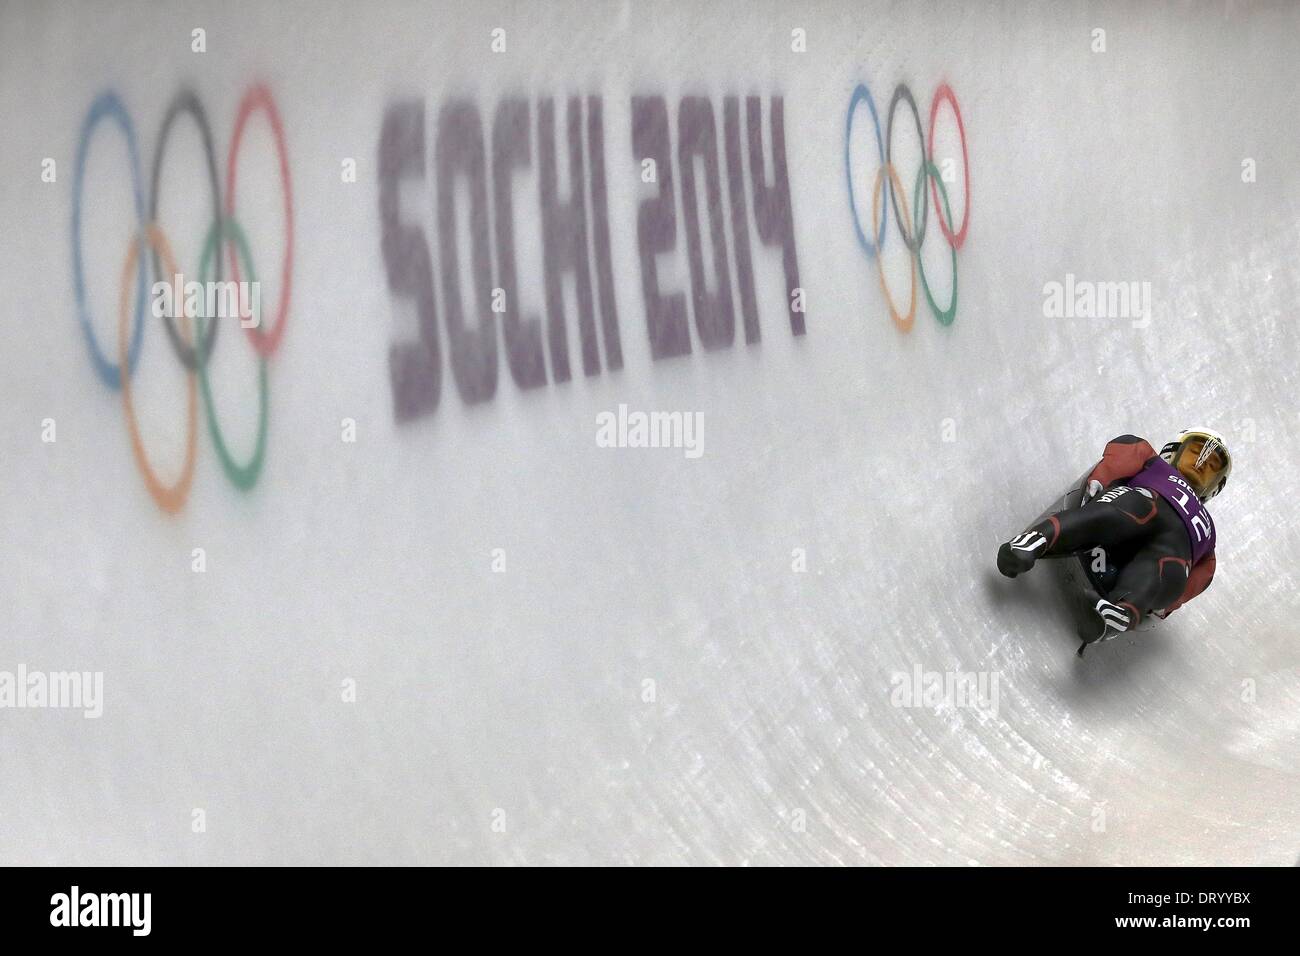 Krasnaya Polyana, Russia. 05th Feb, 2014. Kristaps Maurins of Latvia in action during the Men's Luge training session at the Sanki Sliding Center in Krasnaya Polyana, Russia, 05 February 2014. The Sochi 2014 Olympic Games run from 07 to 23 February 2014. Photo: FREDRIK VON ERICHSEN/dpa/Alamy Live News Stock Photo